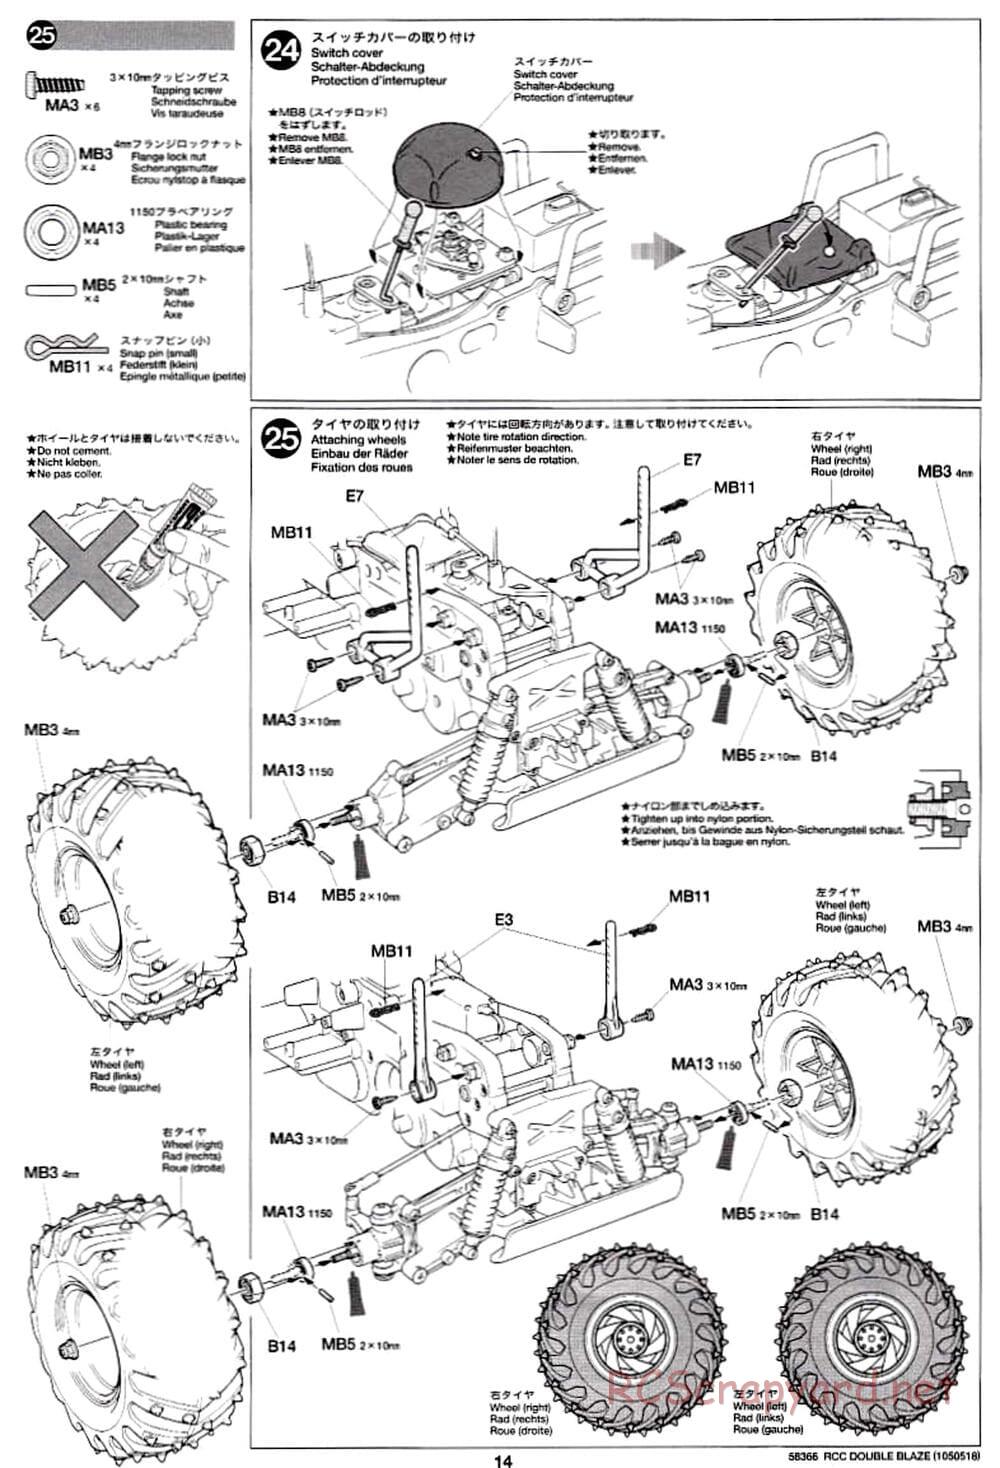 Tamiya - Double Blaze - WR-01 Chassis - Manual - Page 14